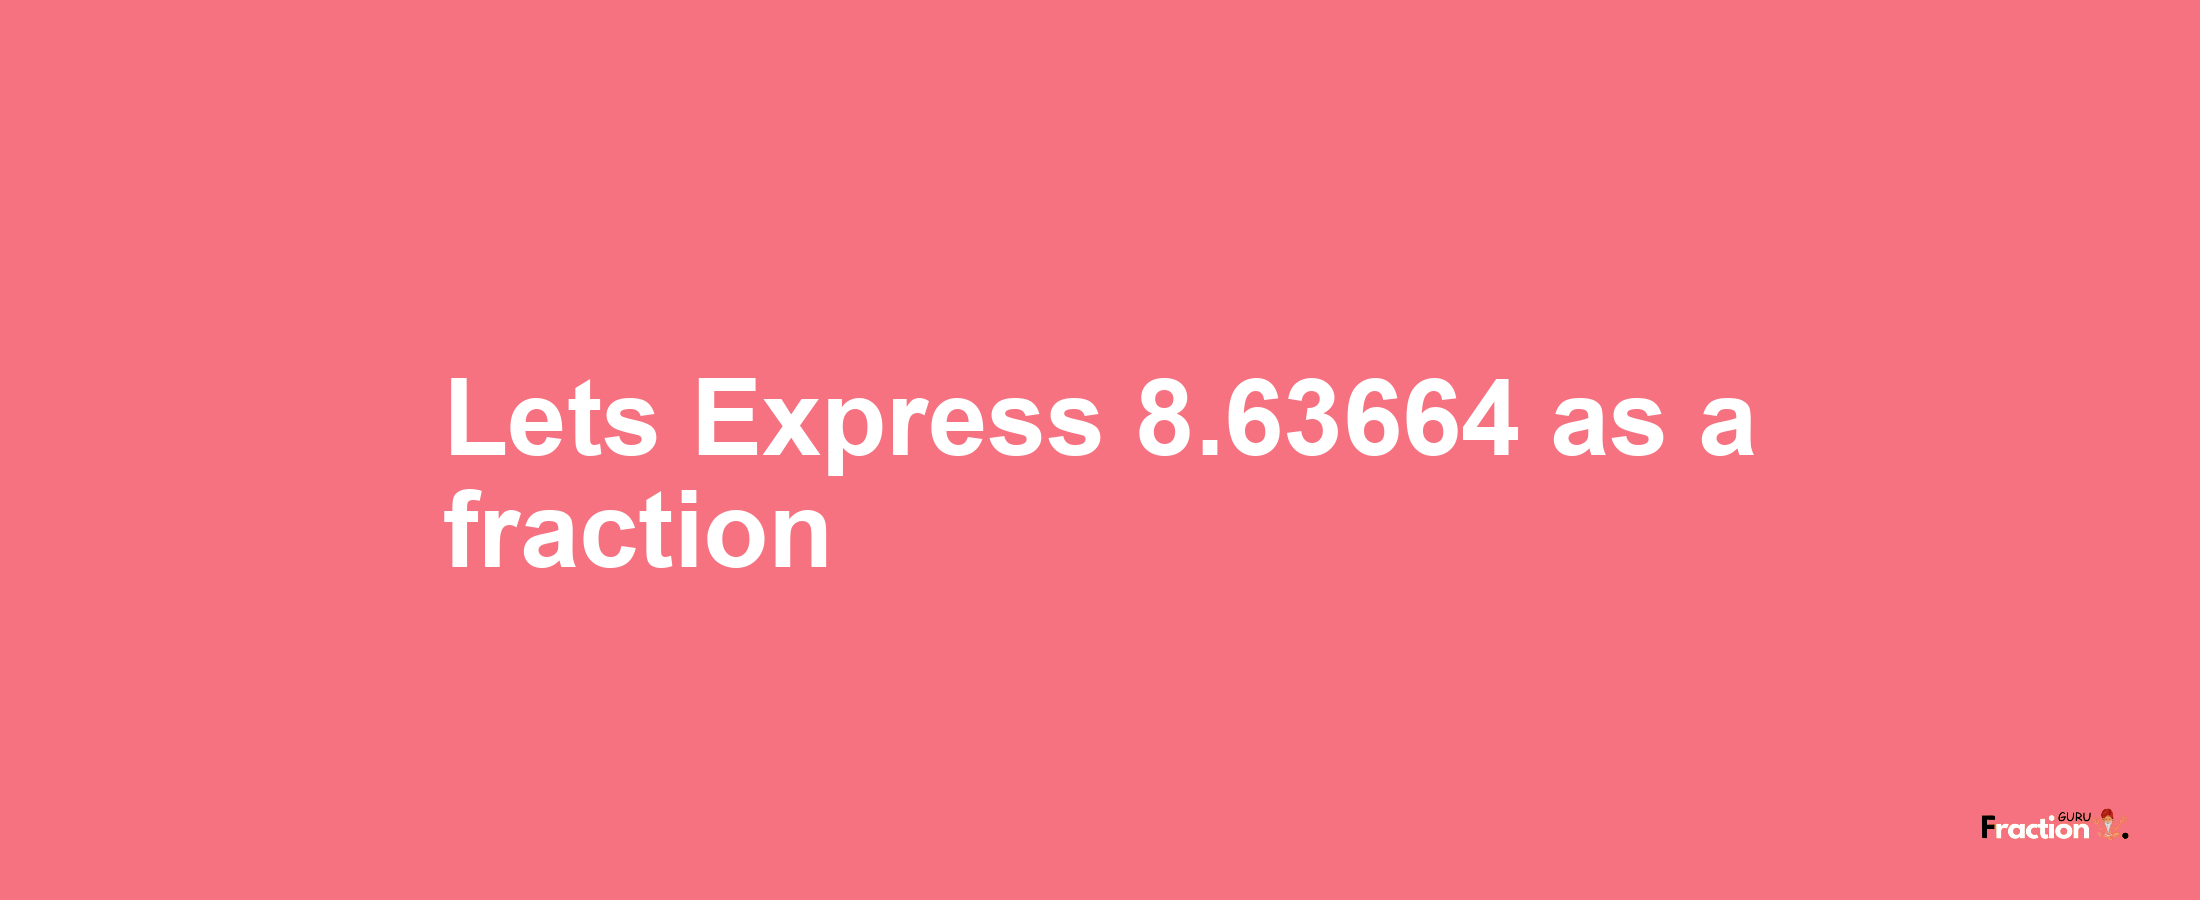 Lets Express 8.63664 as afraction